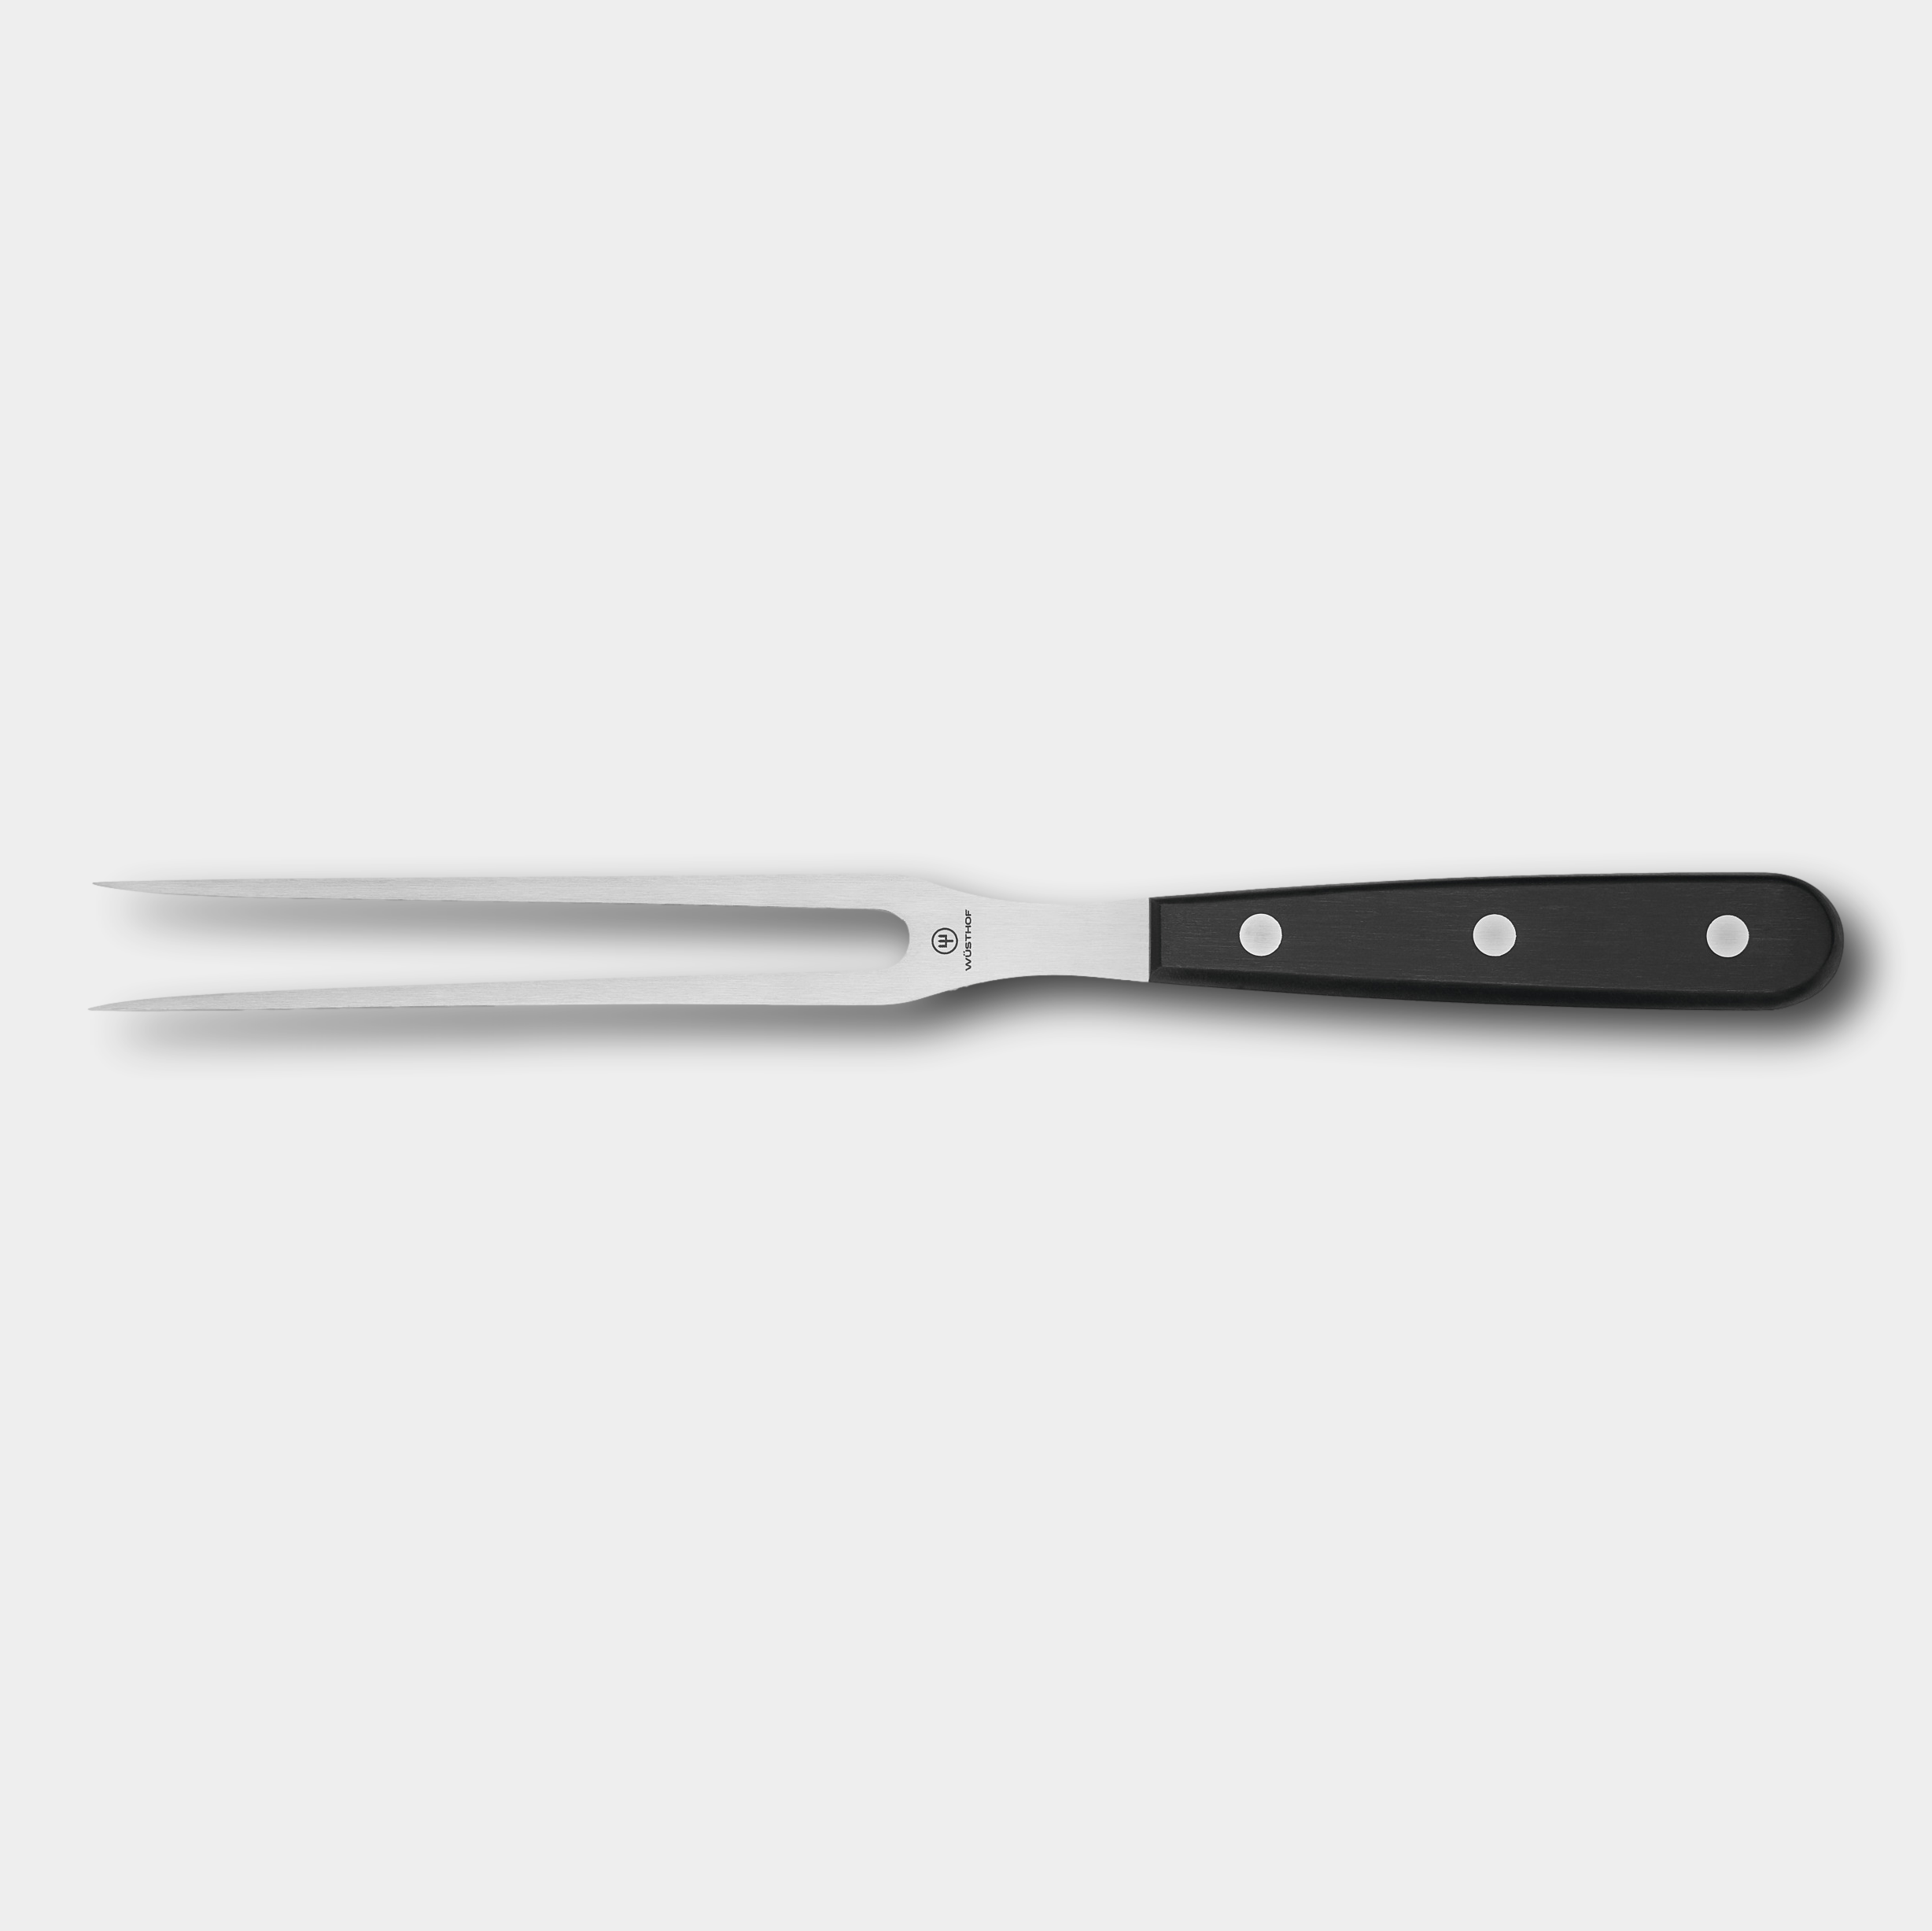 Wusthof Classic 2 Piece Carving Set